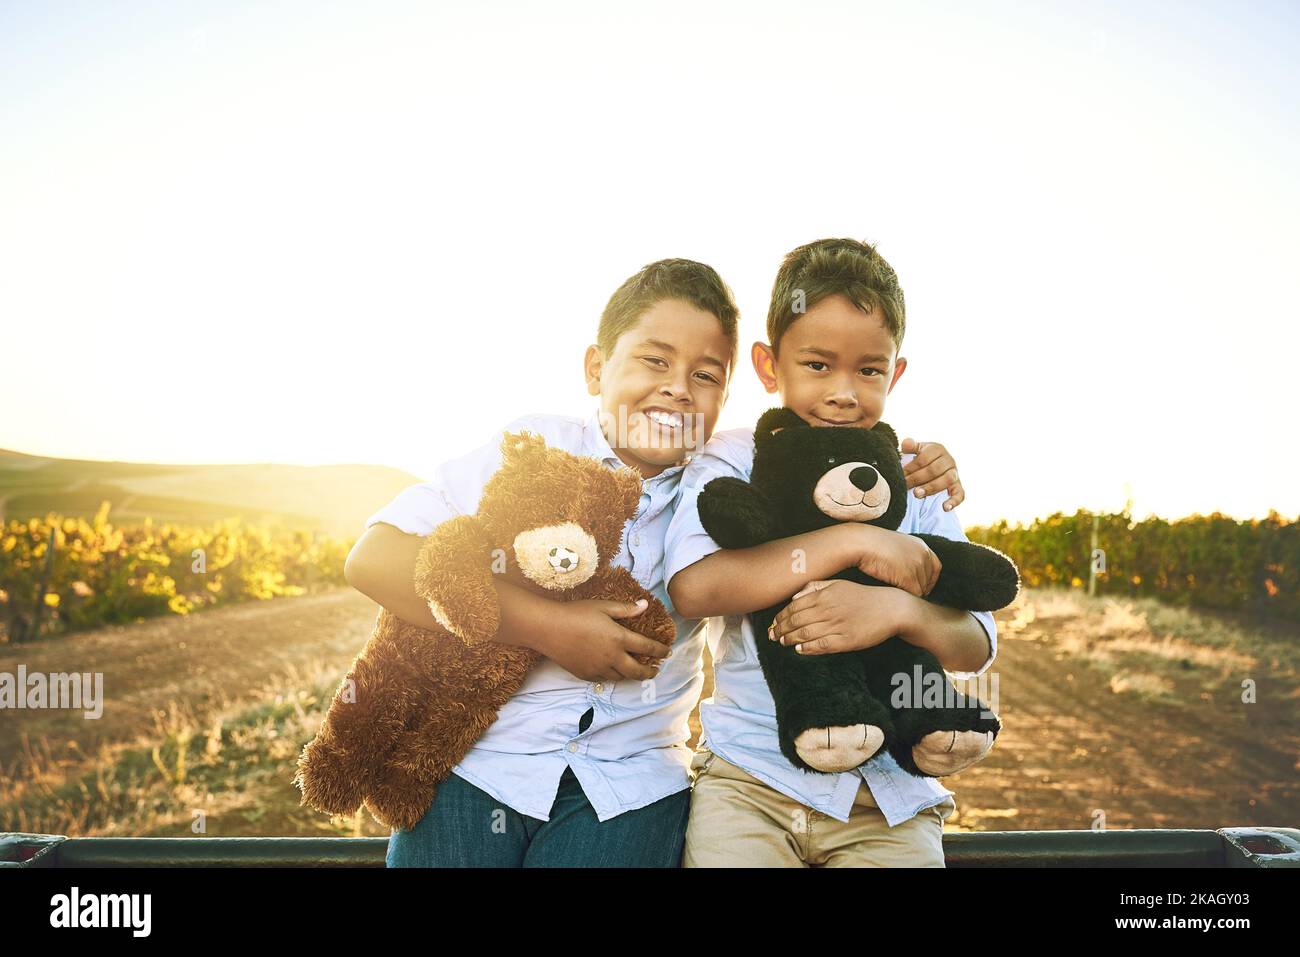 We always bring them along on our adventures. Portrait of two little brothers playing with teddy bears outdoors. Stock Photo